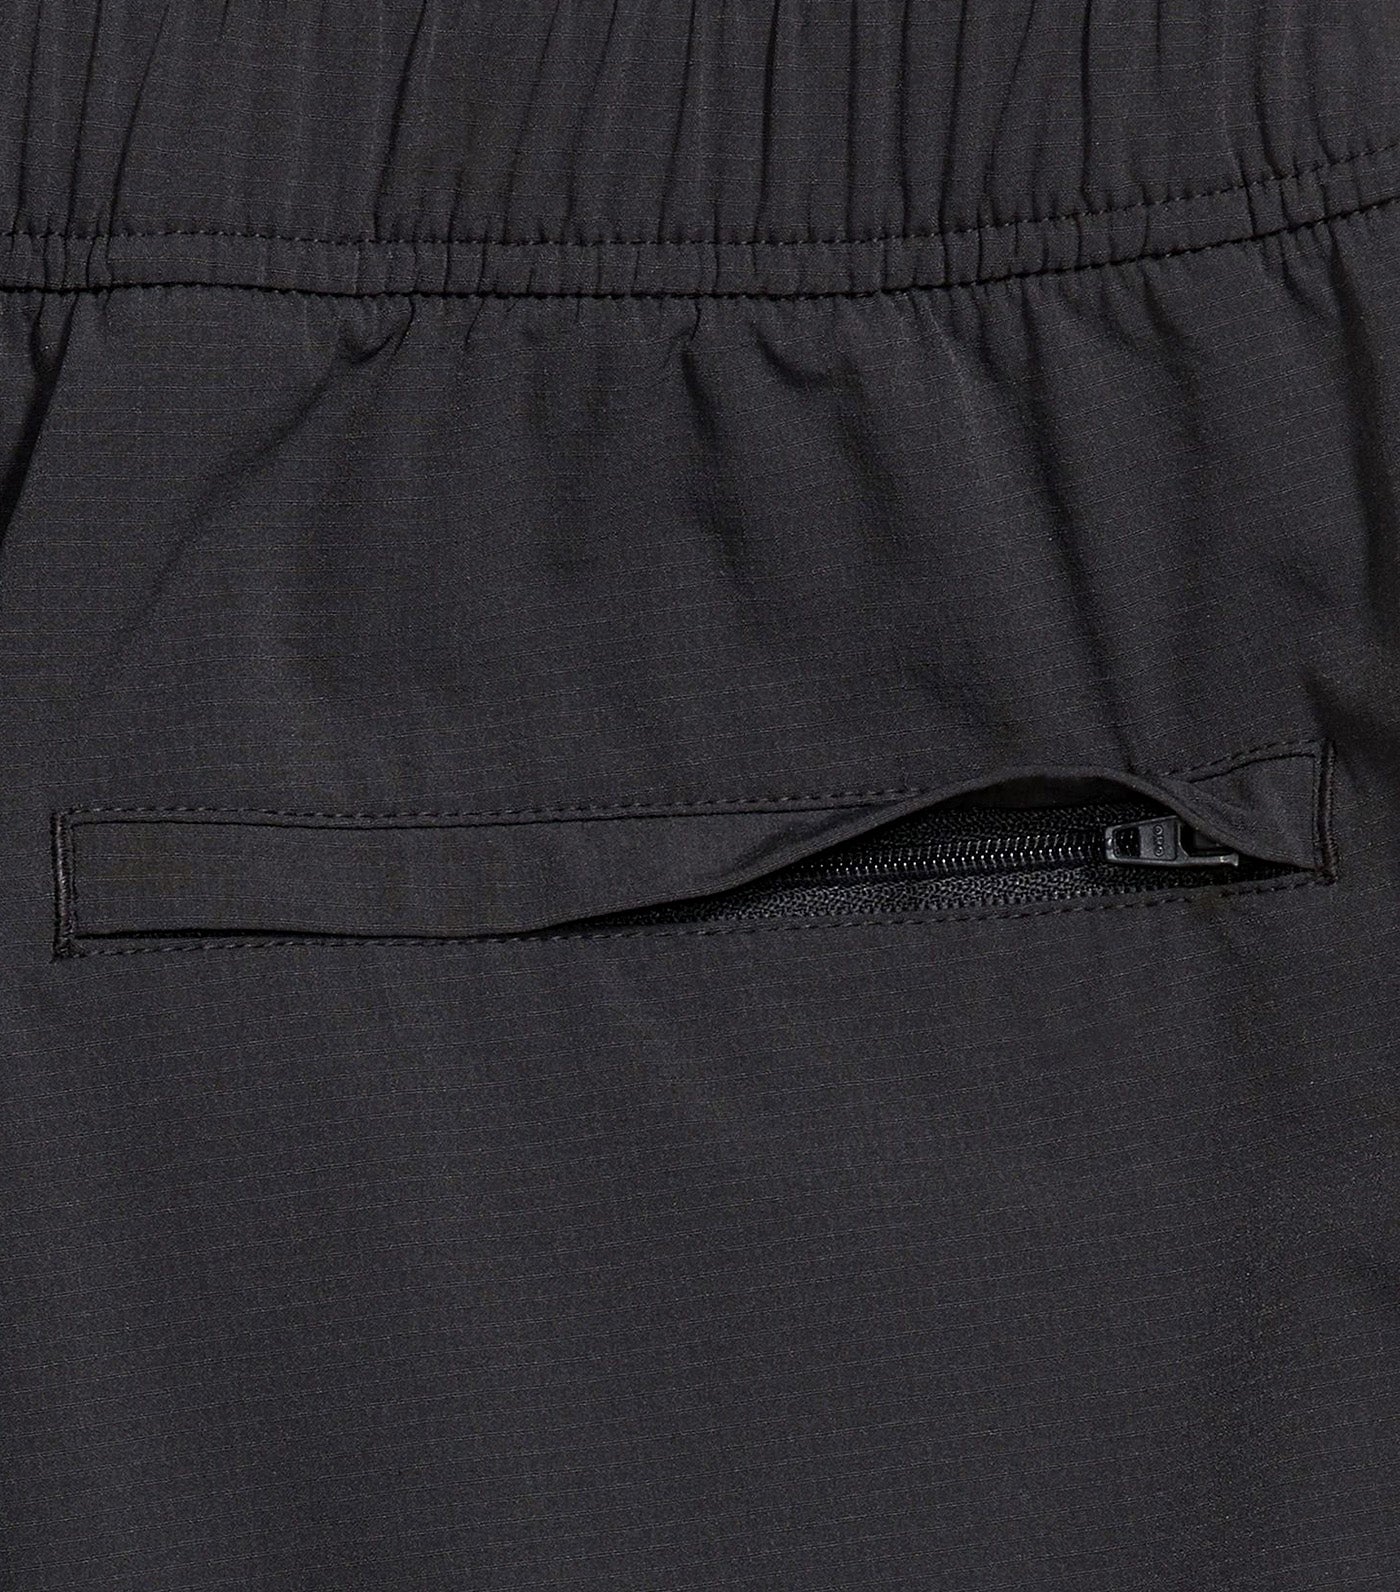 Tech Performance Shorts for Men 7-Inch Inseam Panther